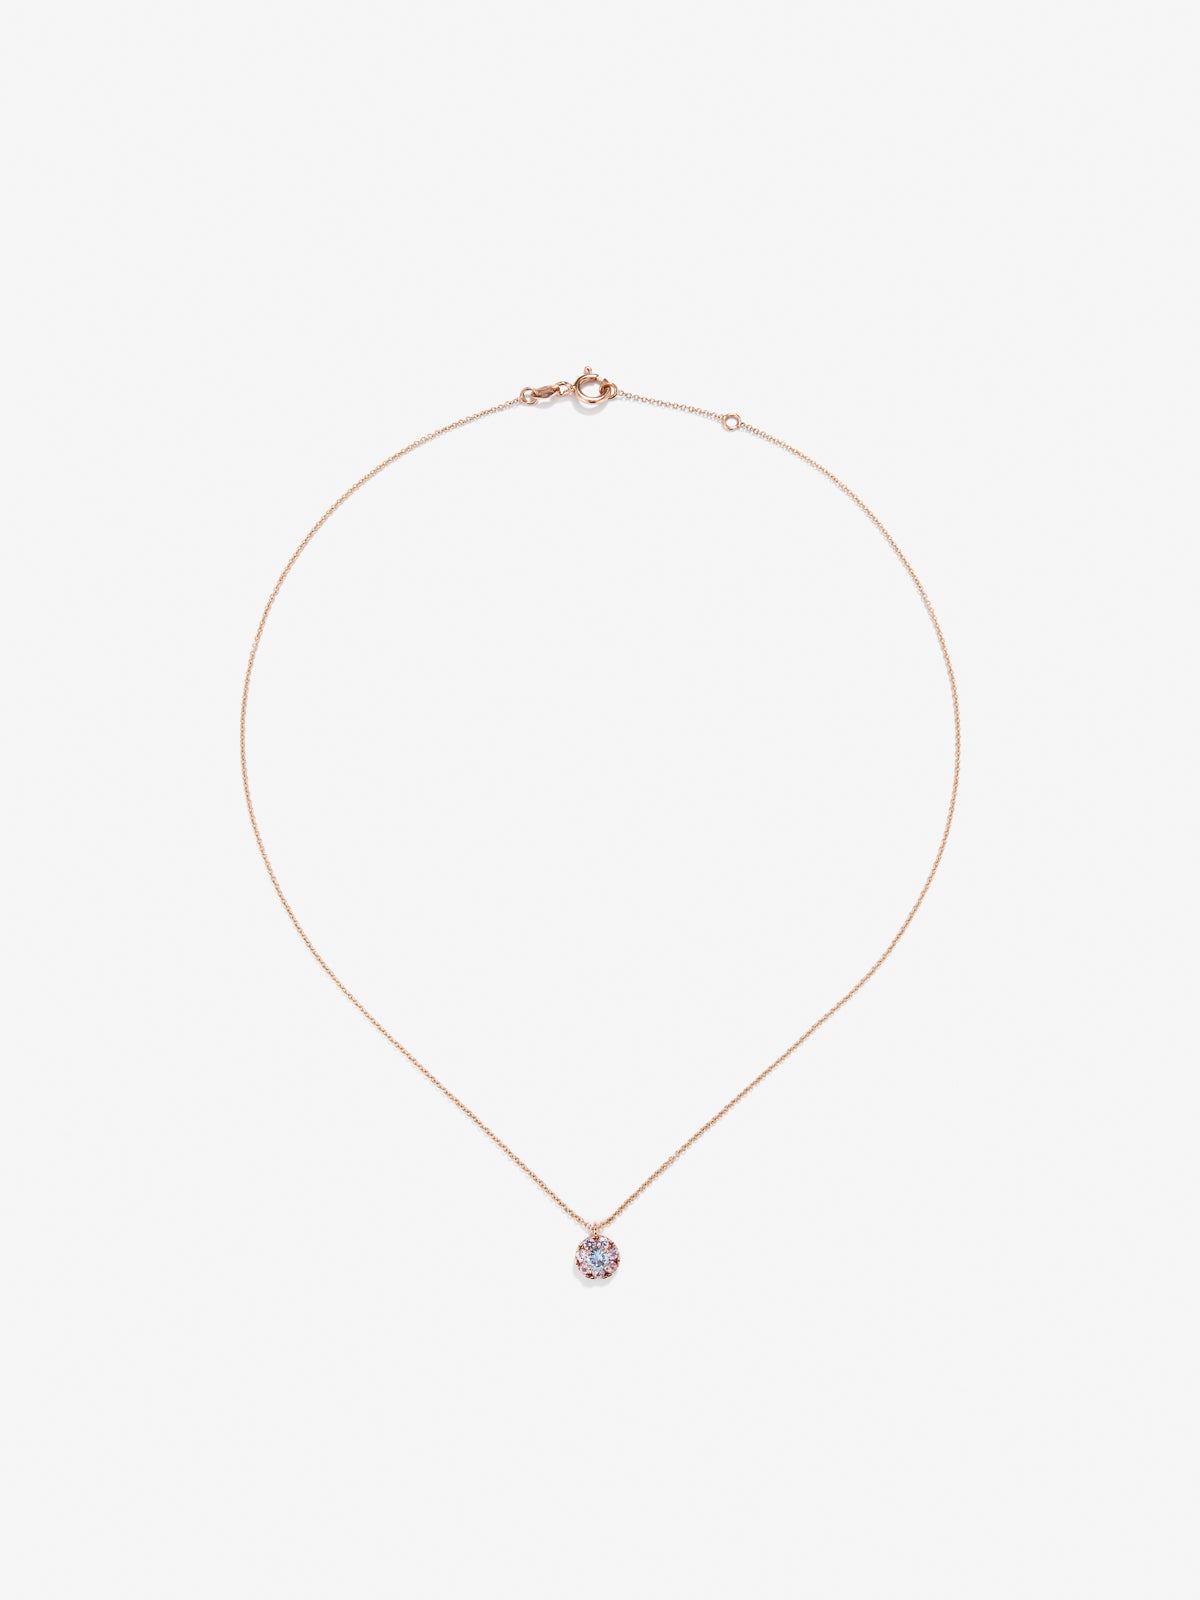 18K rose gold pendant with 8 brilliant-cut multicolor sapphires with a total of 0.41 cts